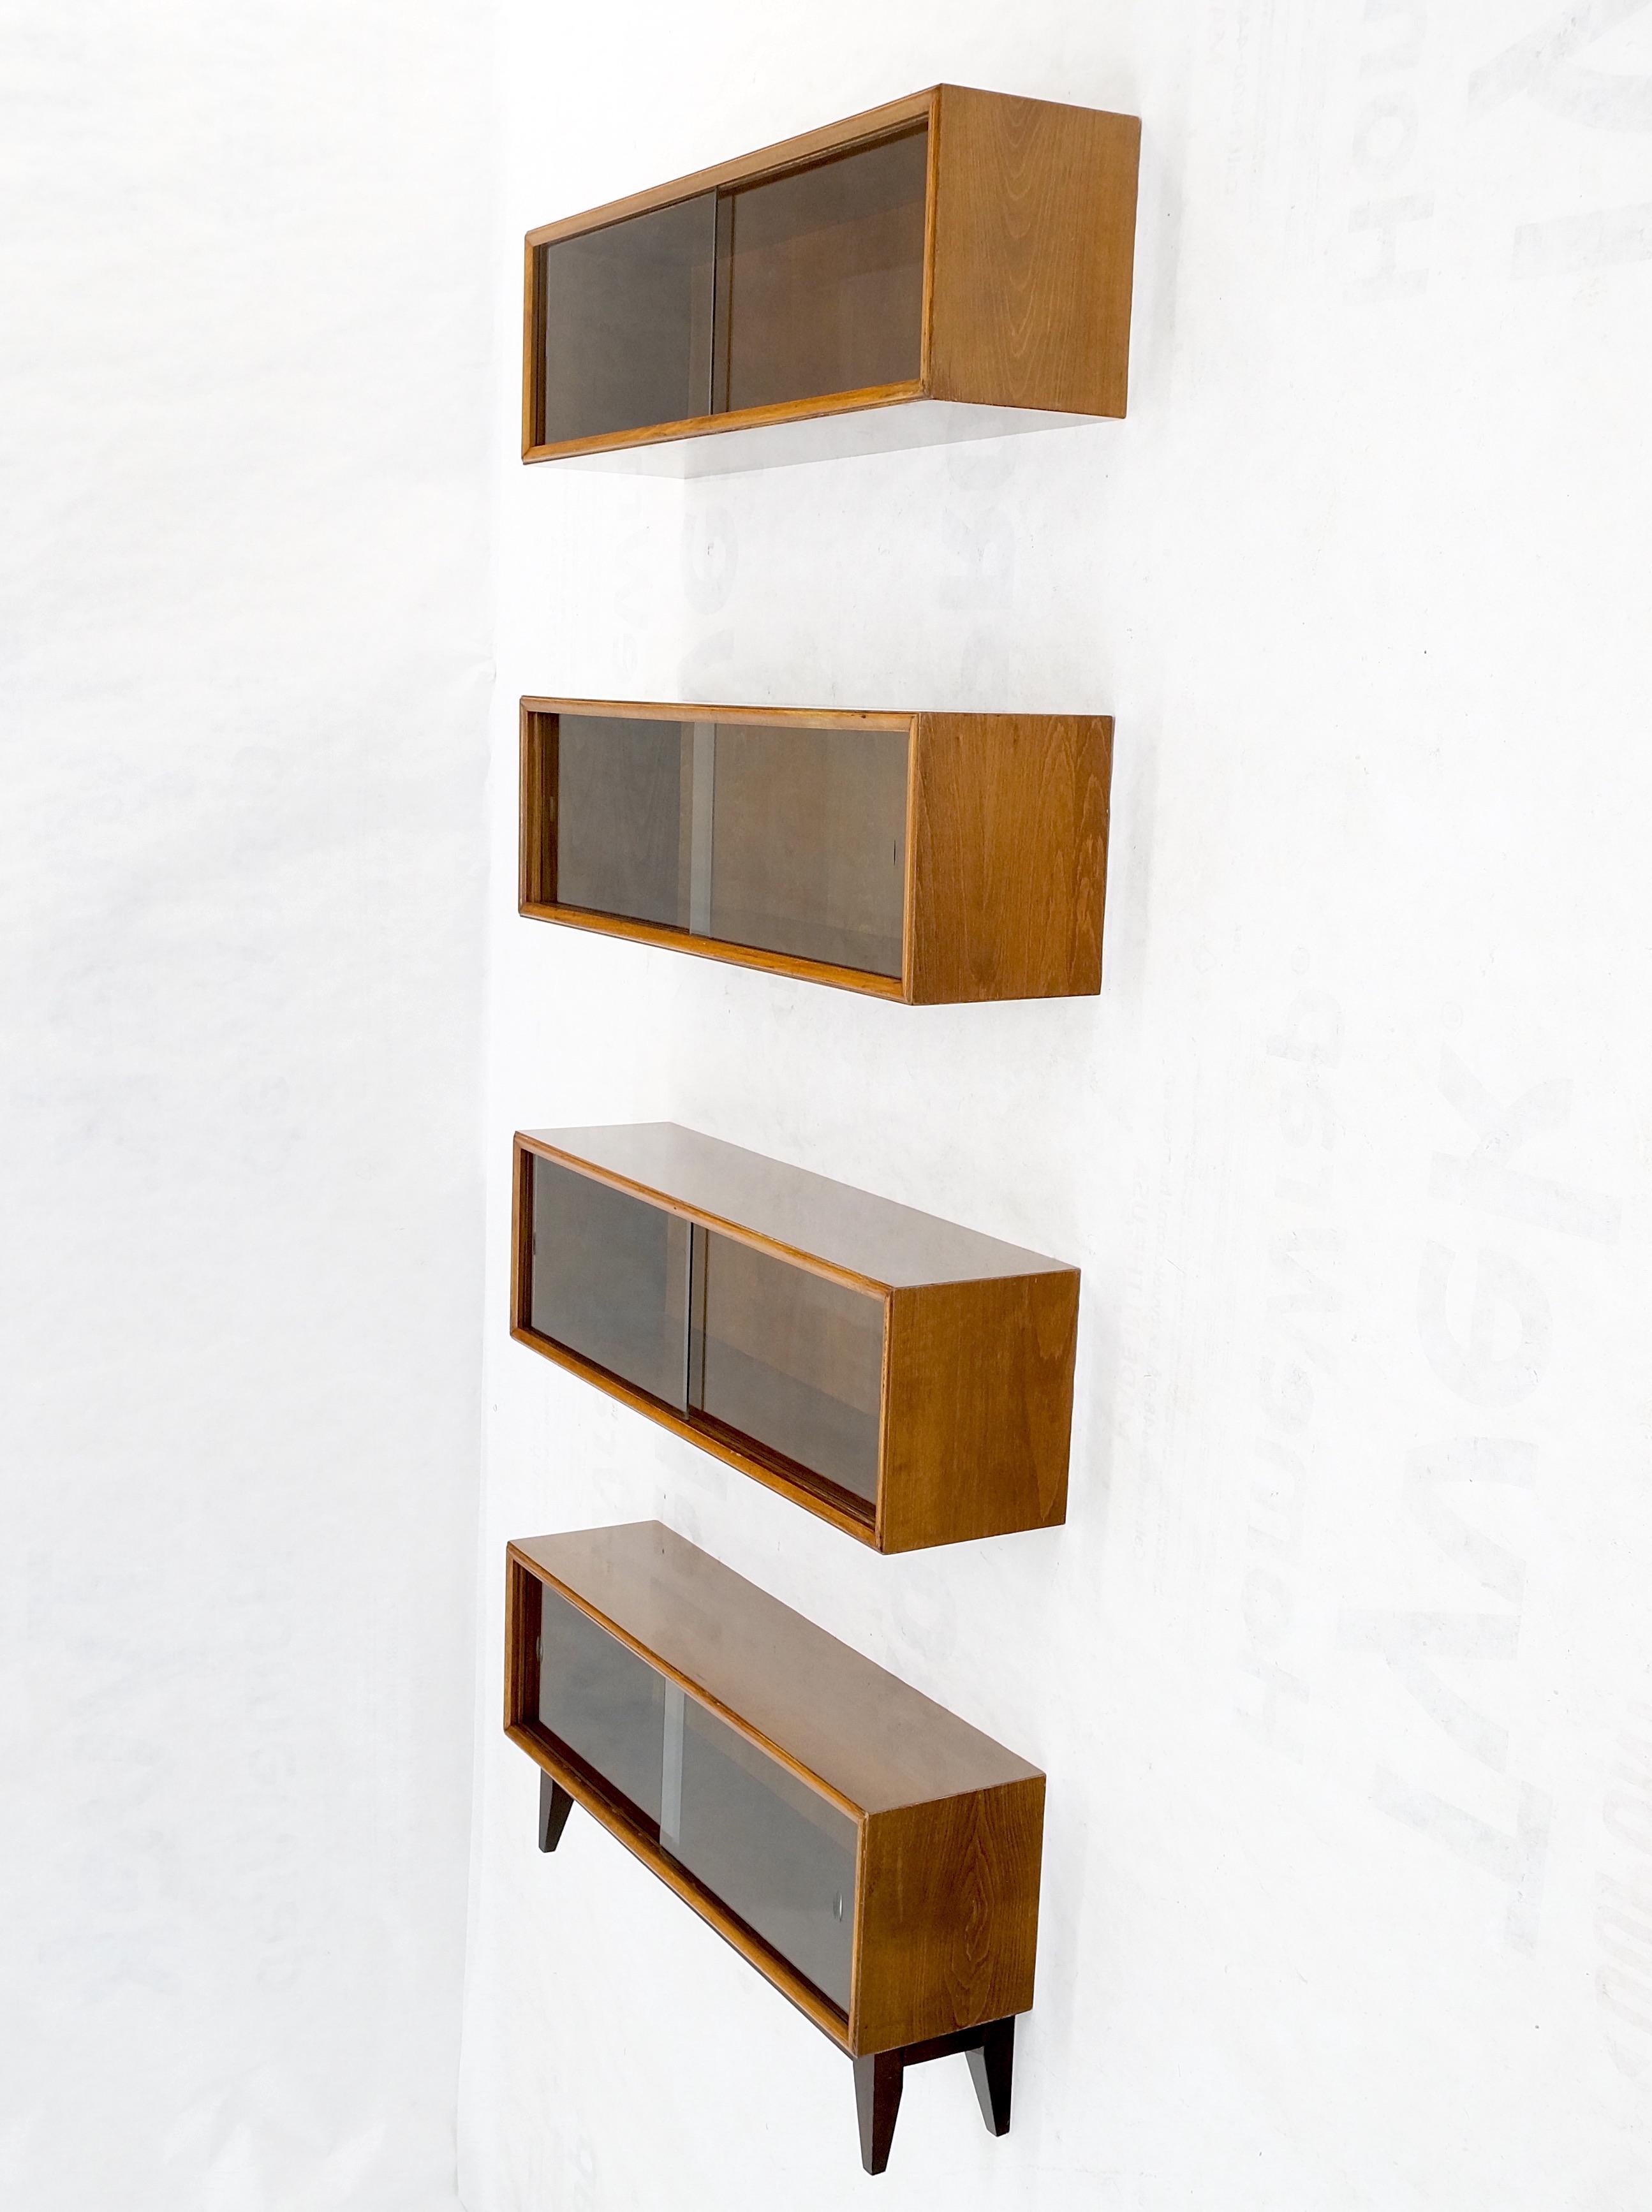 Mid-Century Modern sliding glass doors 4 bays stacking or hanging bookcase.
Made in Yugoslavia.